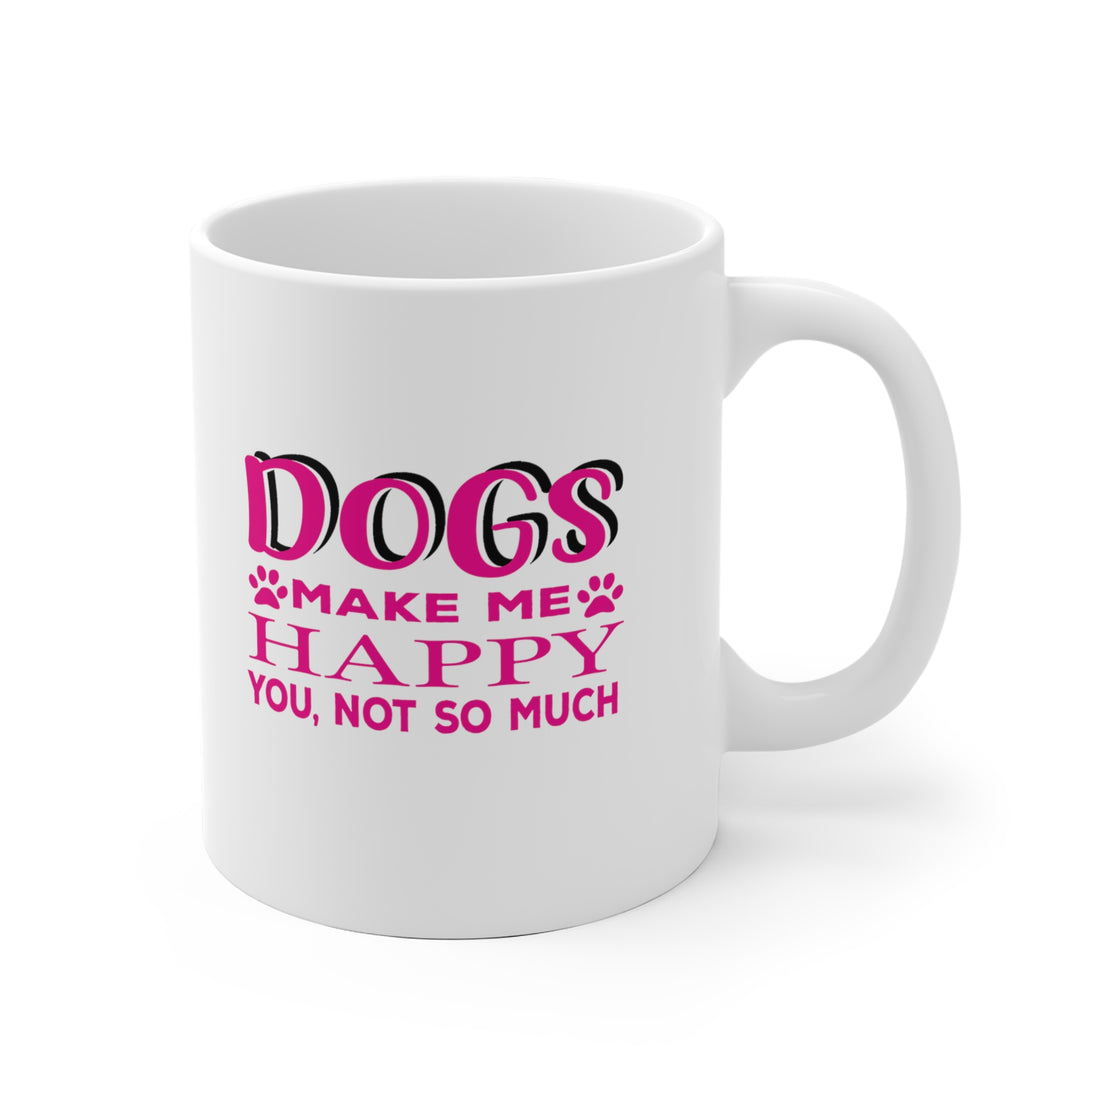 Dogs Make Me Happy You Not So Much - White Ceramic Mug 2 sizes Available